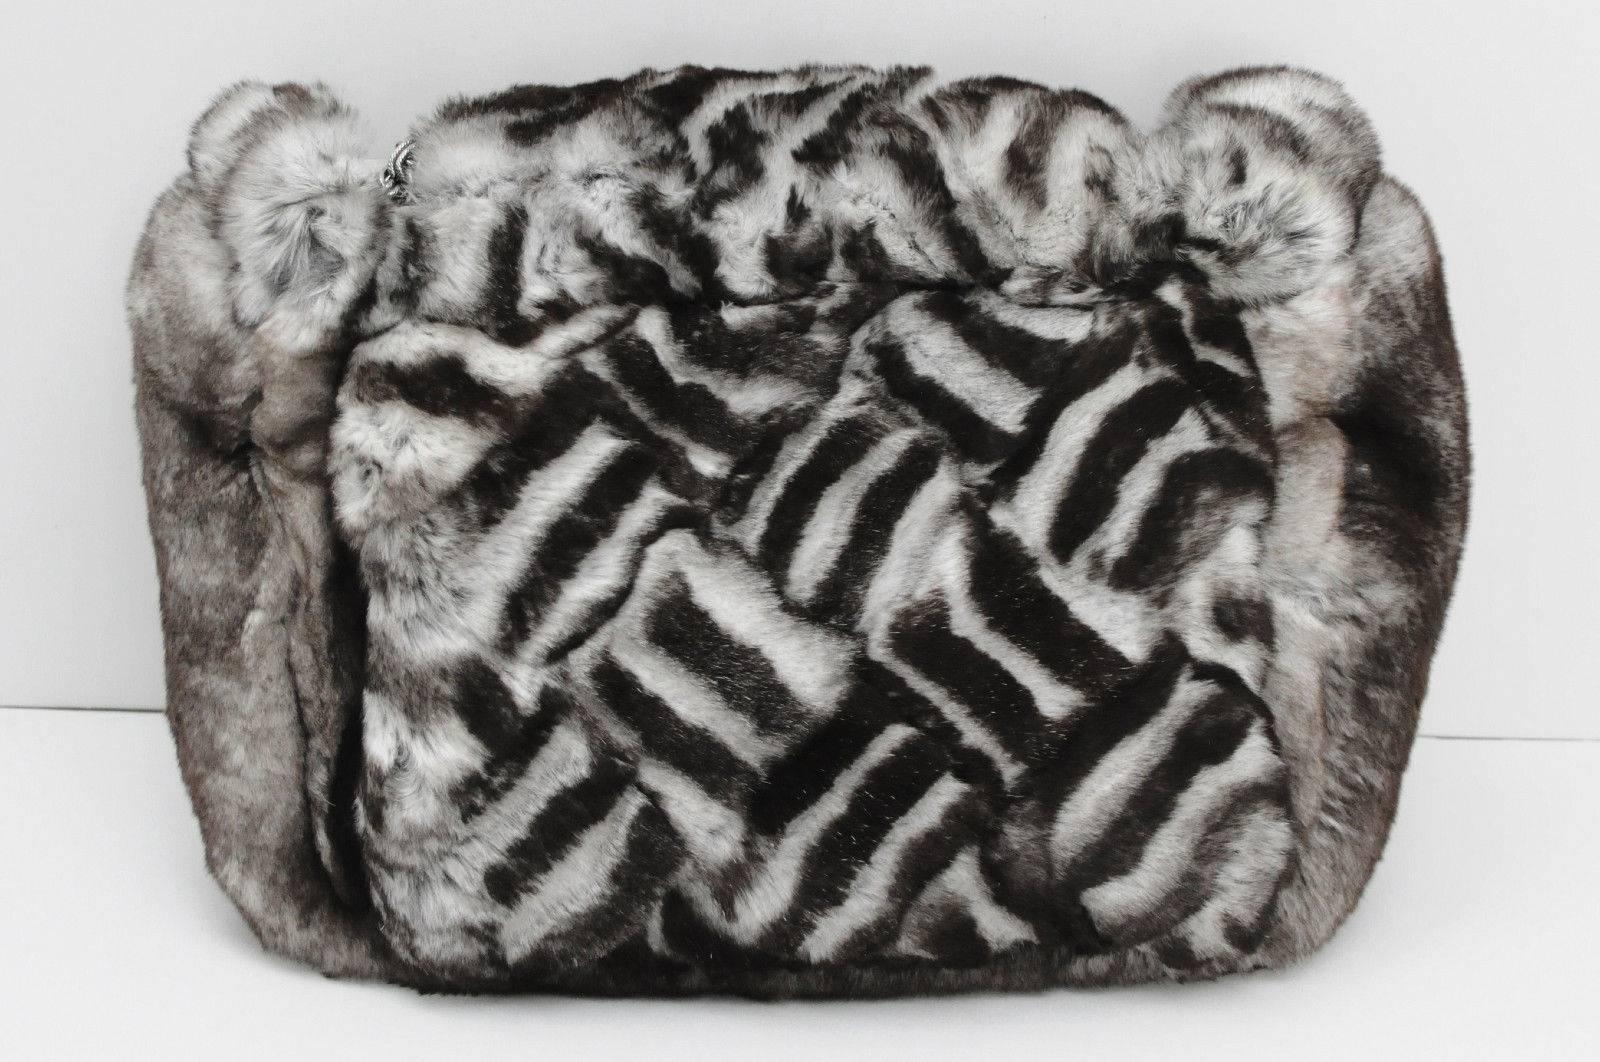 This authentic Limited Edition Chanel Chinchilla fur clutch looks and feels like no other handbag in the world. The luxuriously soft black & white fur covers the entire bag and blends perfectly with darkened silver Chanel 